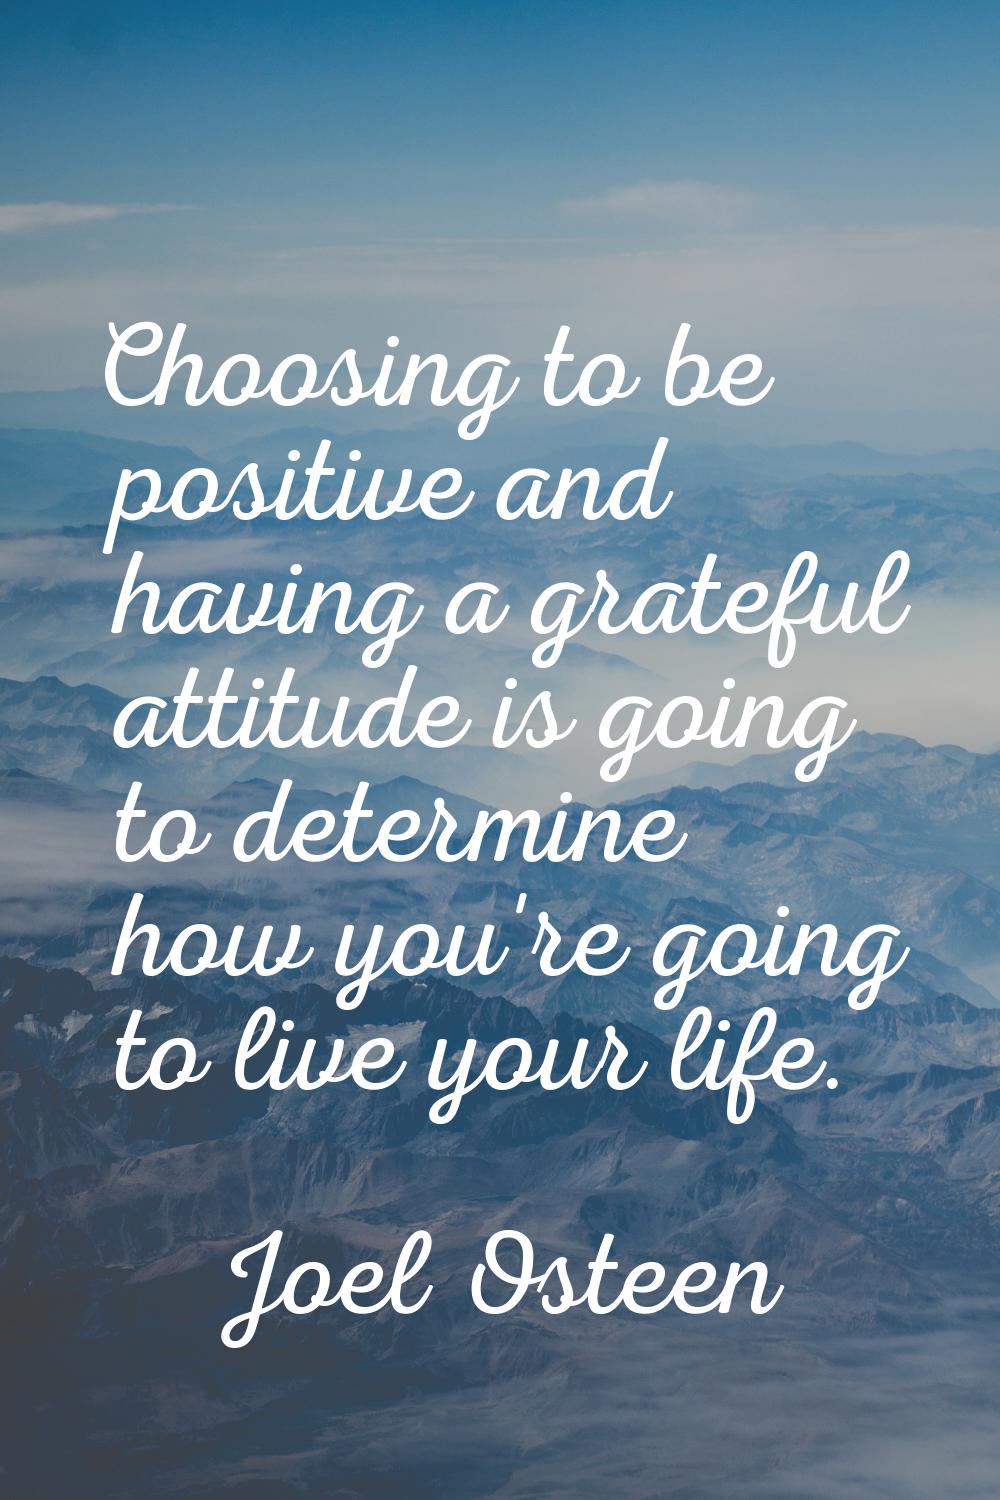 Choosing to be positive and having a grateful attitude is going to determine how you're going to li